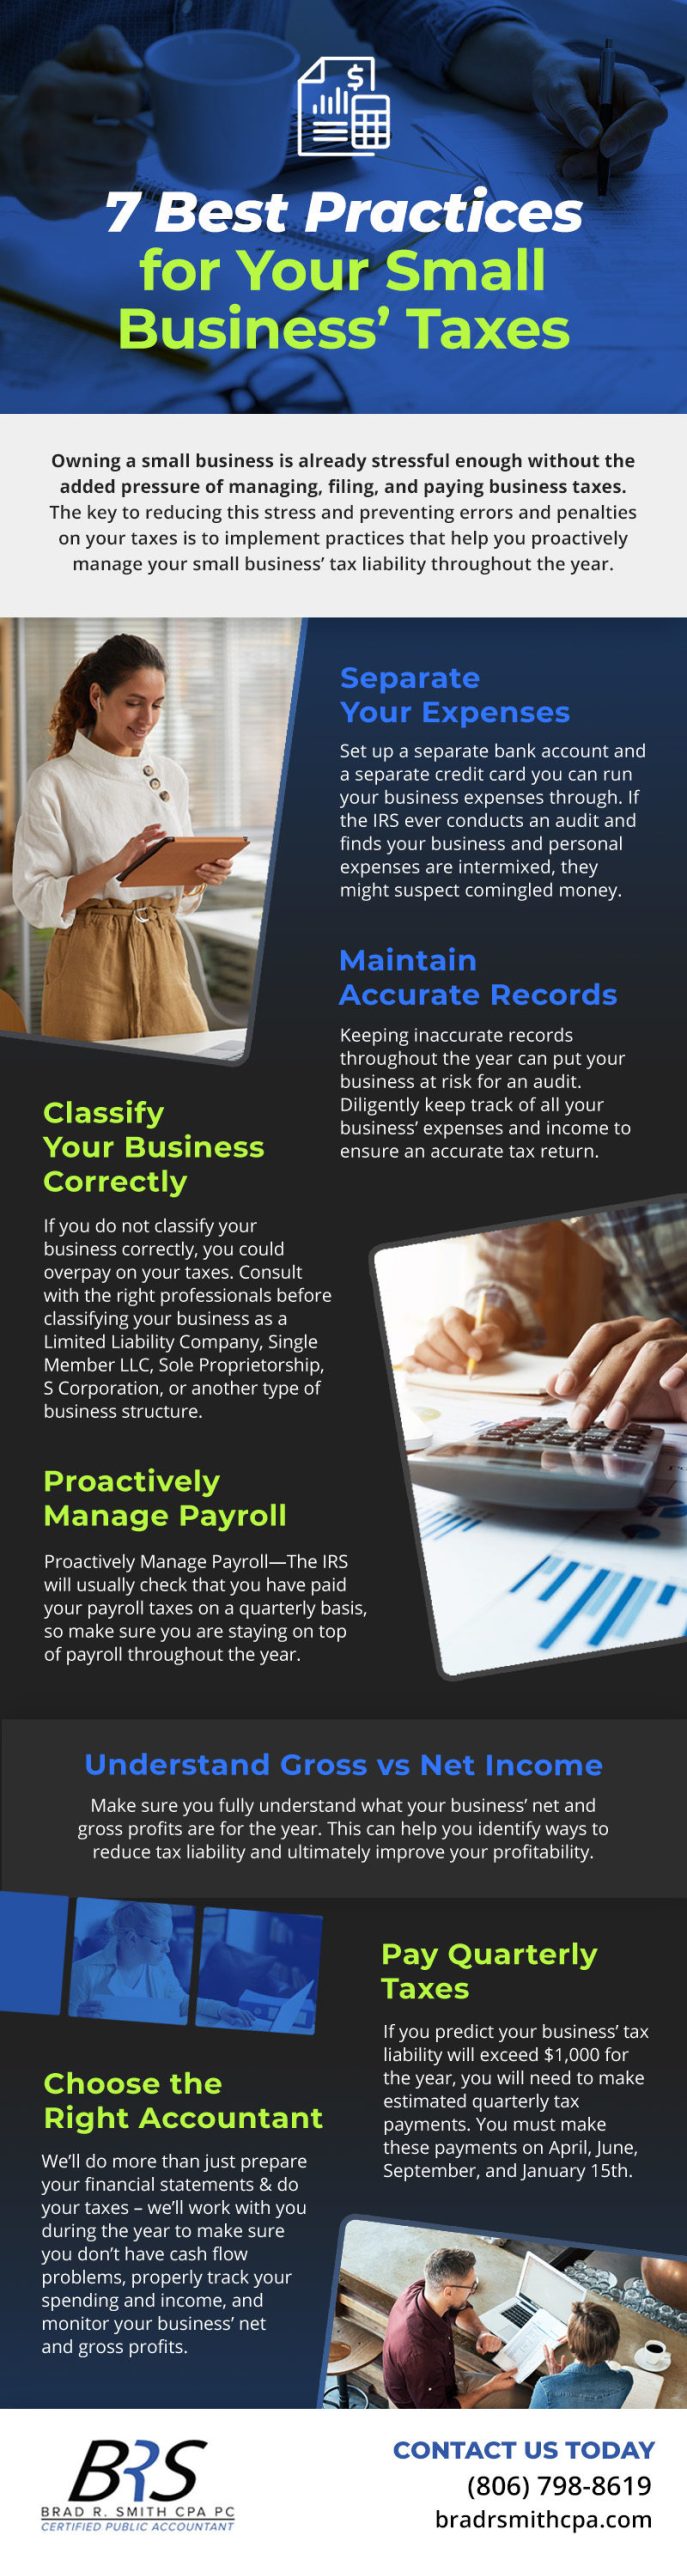 7 Best Practices for Your Small Business’ Taxes [infographic]